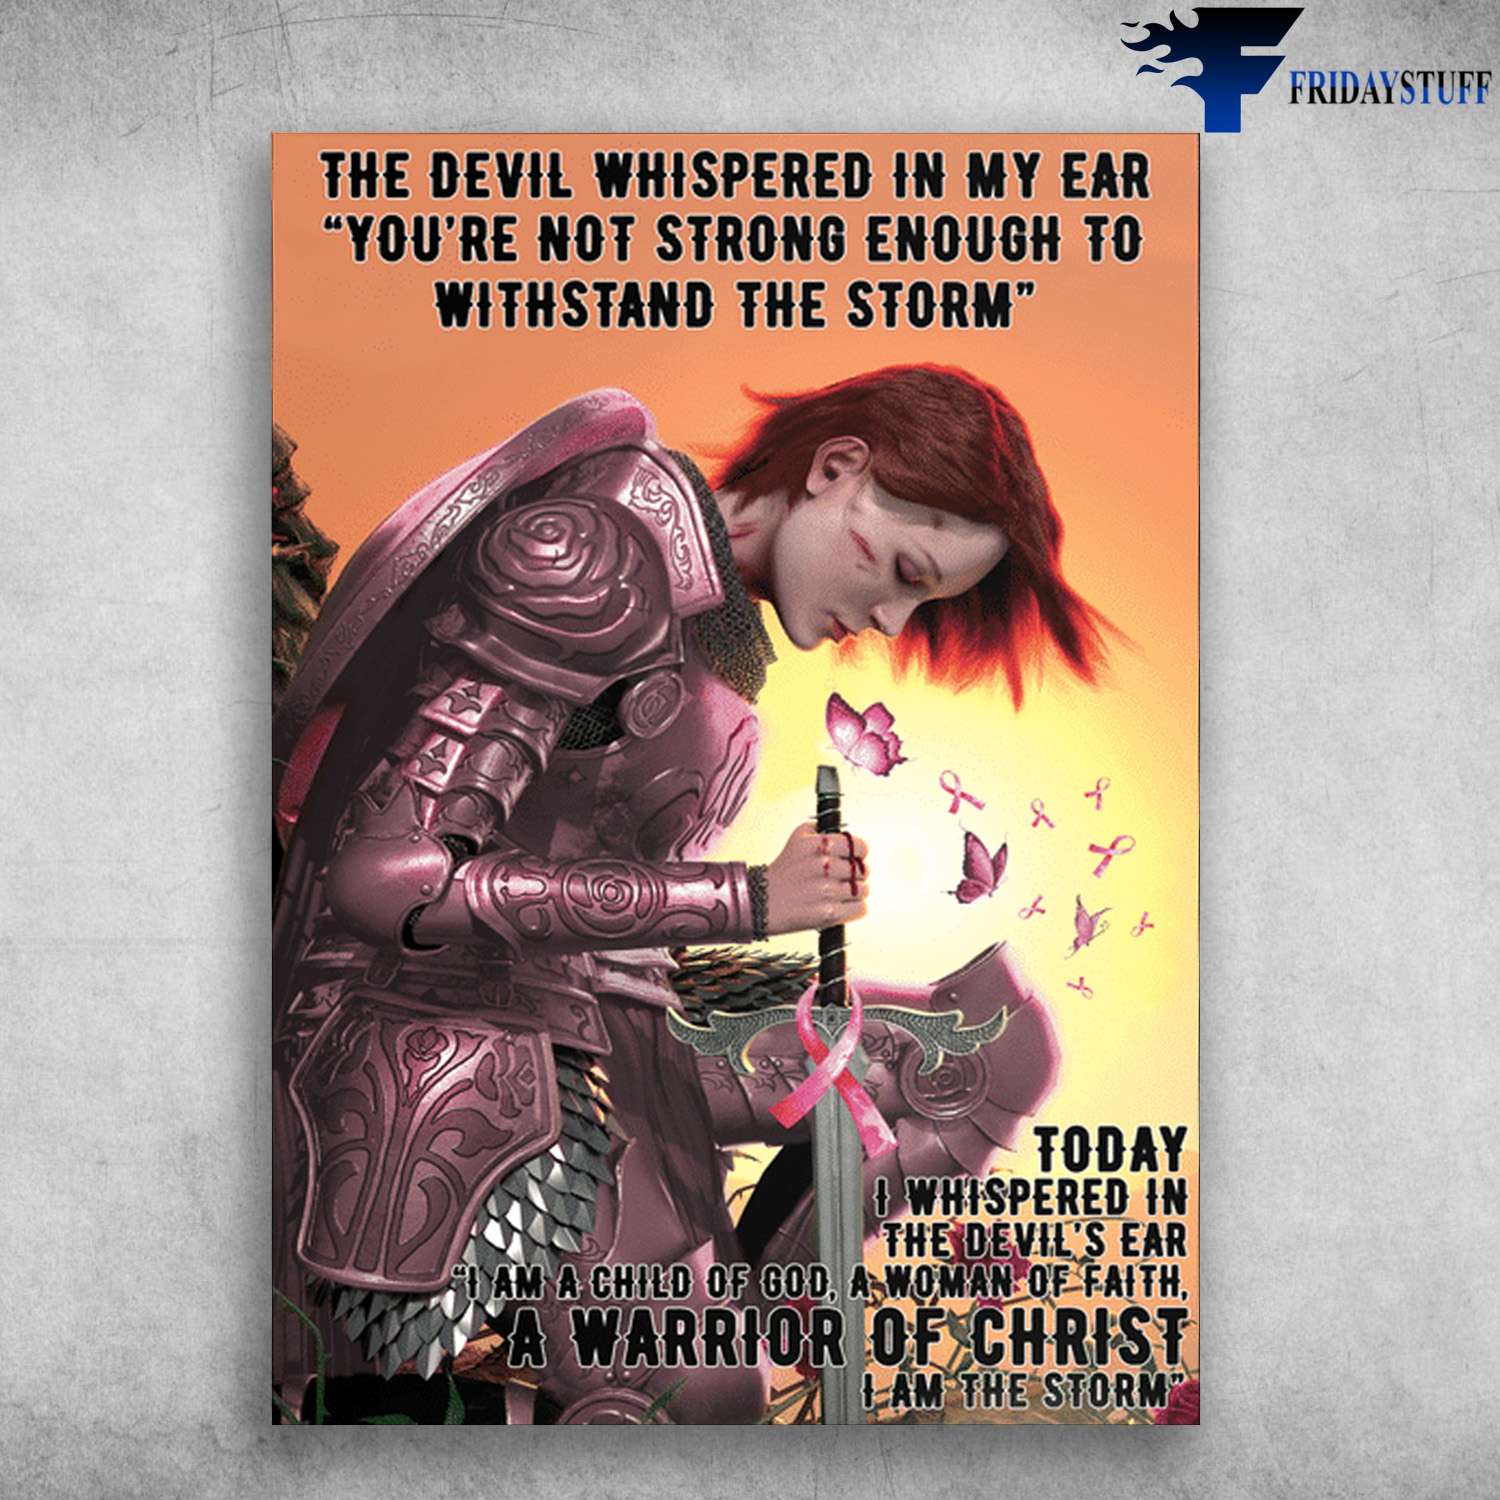 Female Warrior, Awareness Ribbon - The Divil Whispered In My Ear, You're Not Strong Enough To Withstand The Storm, Today I Whispered In The Devils Ear, I Am A Child Of God